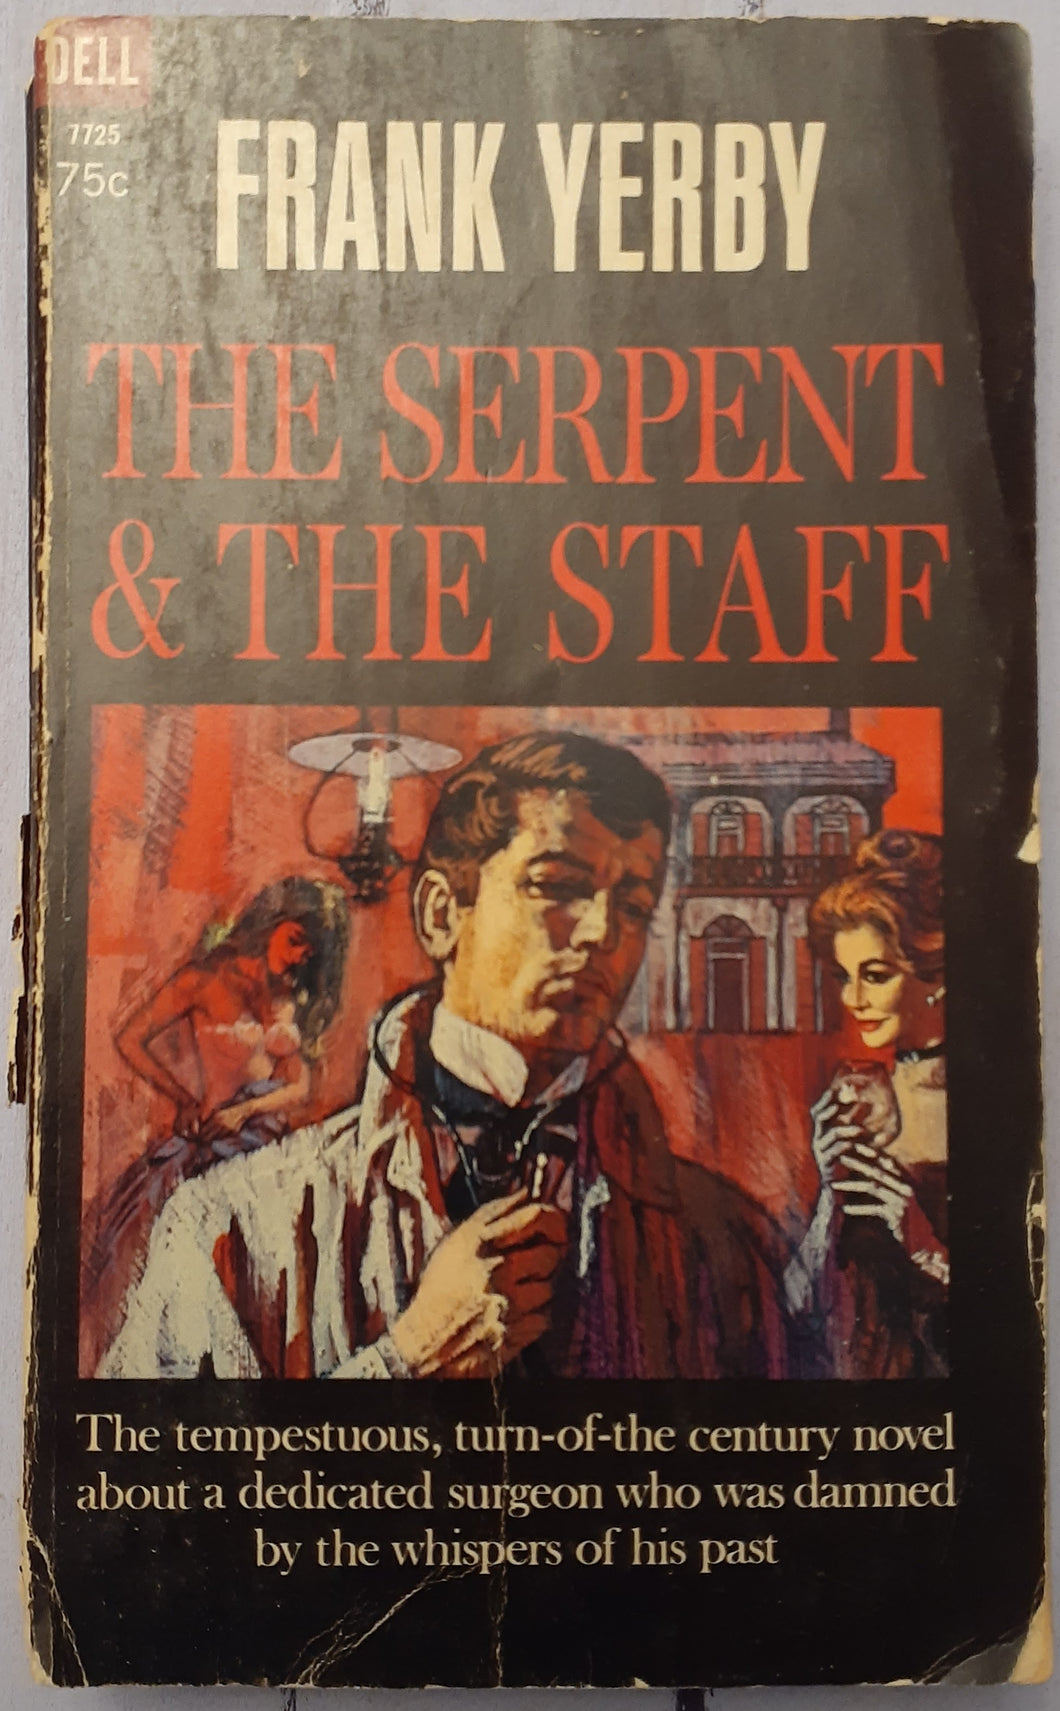 The Serpent and the Staff